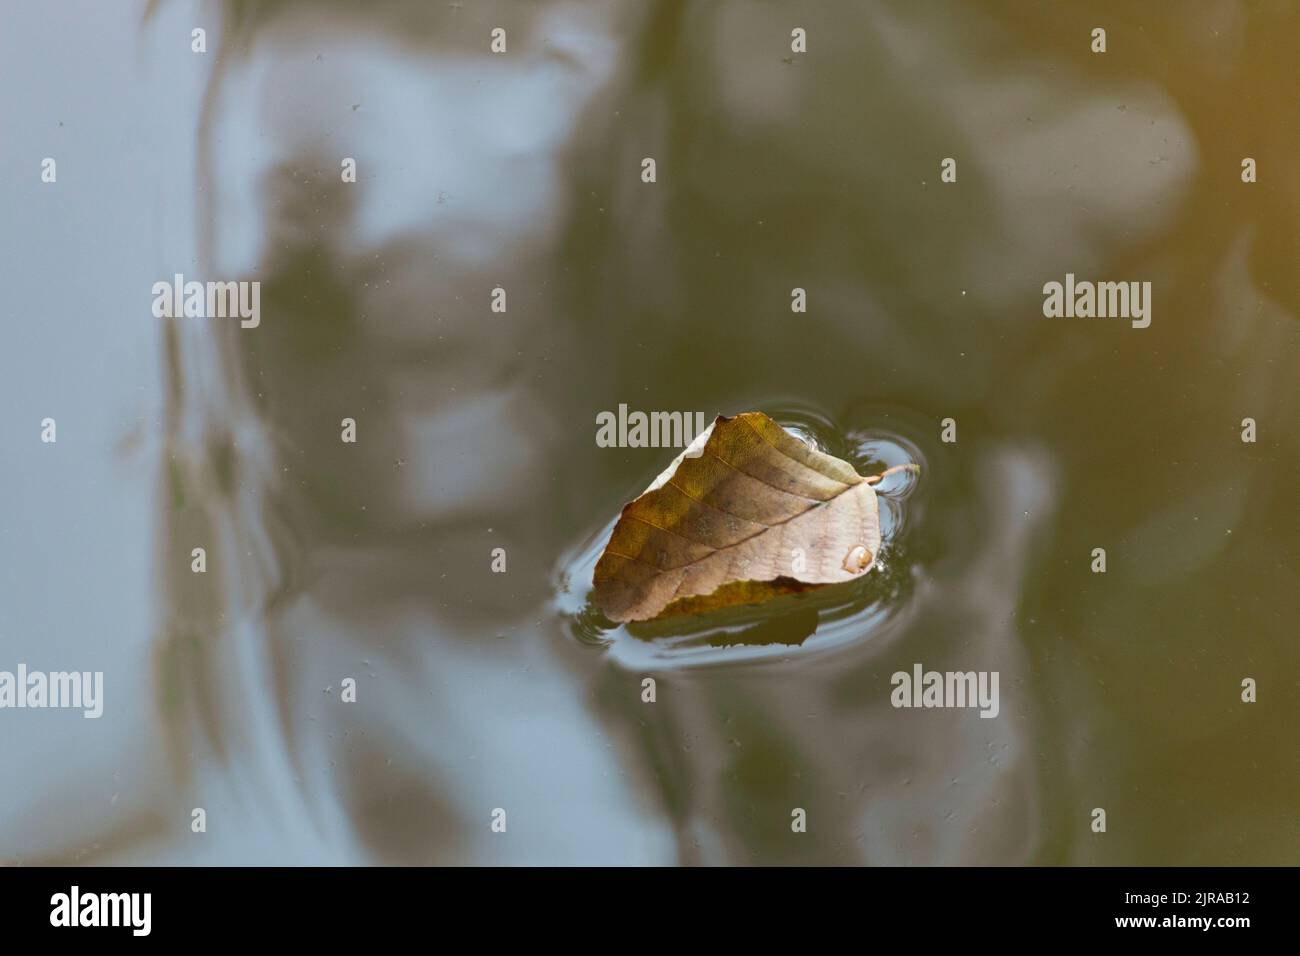 A close up view of a dead leaf that has fallen into the lake Stock Photo